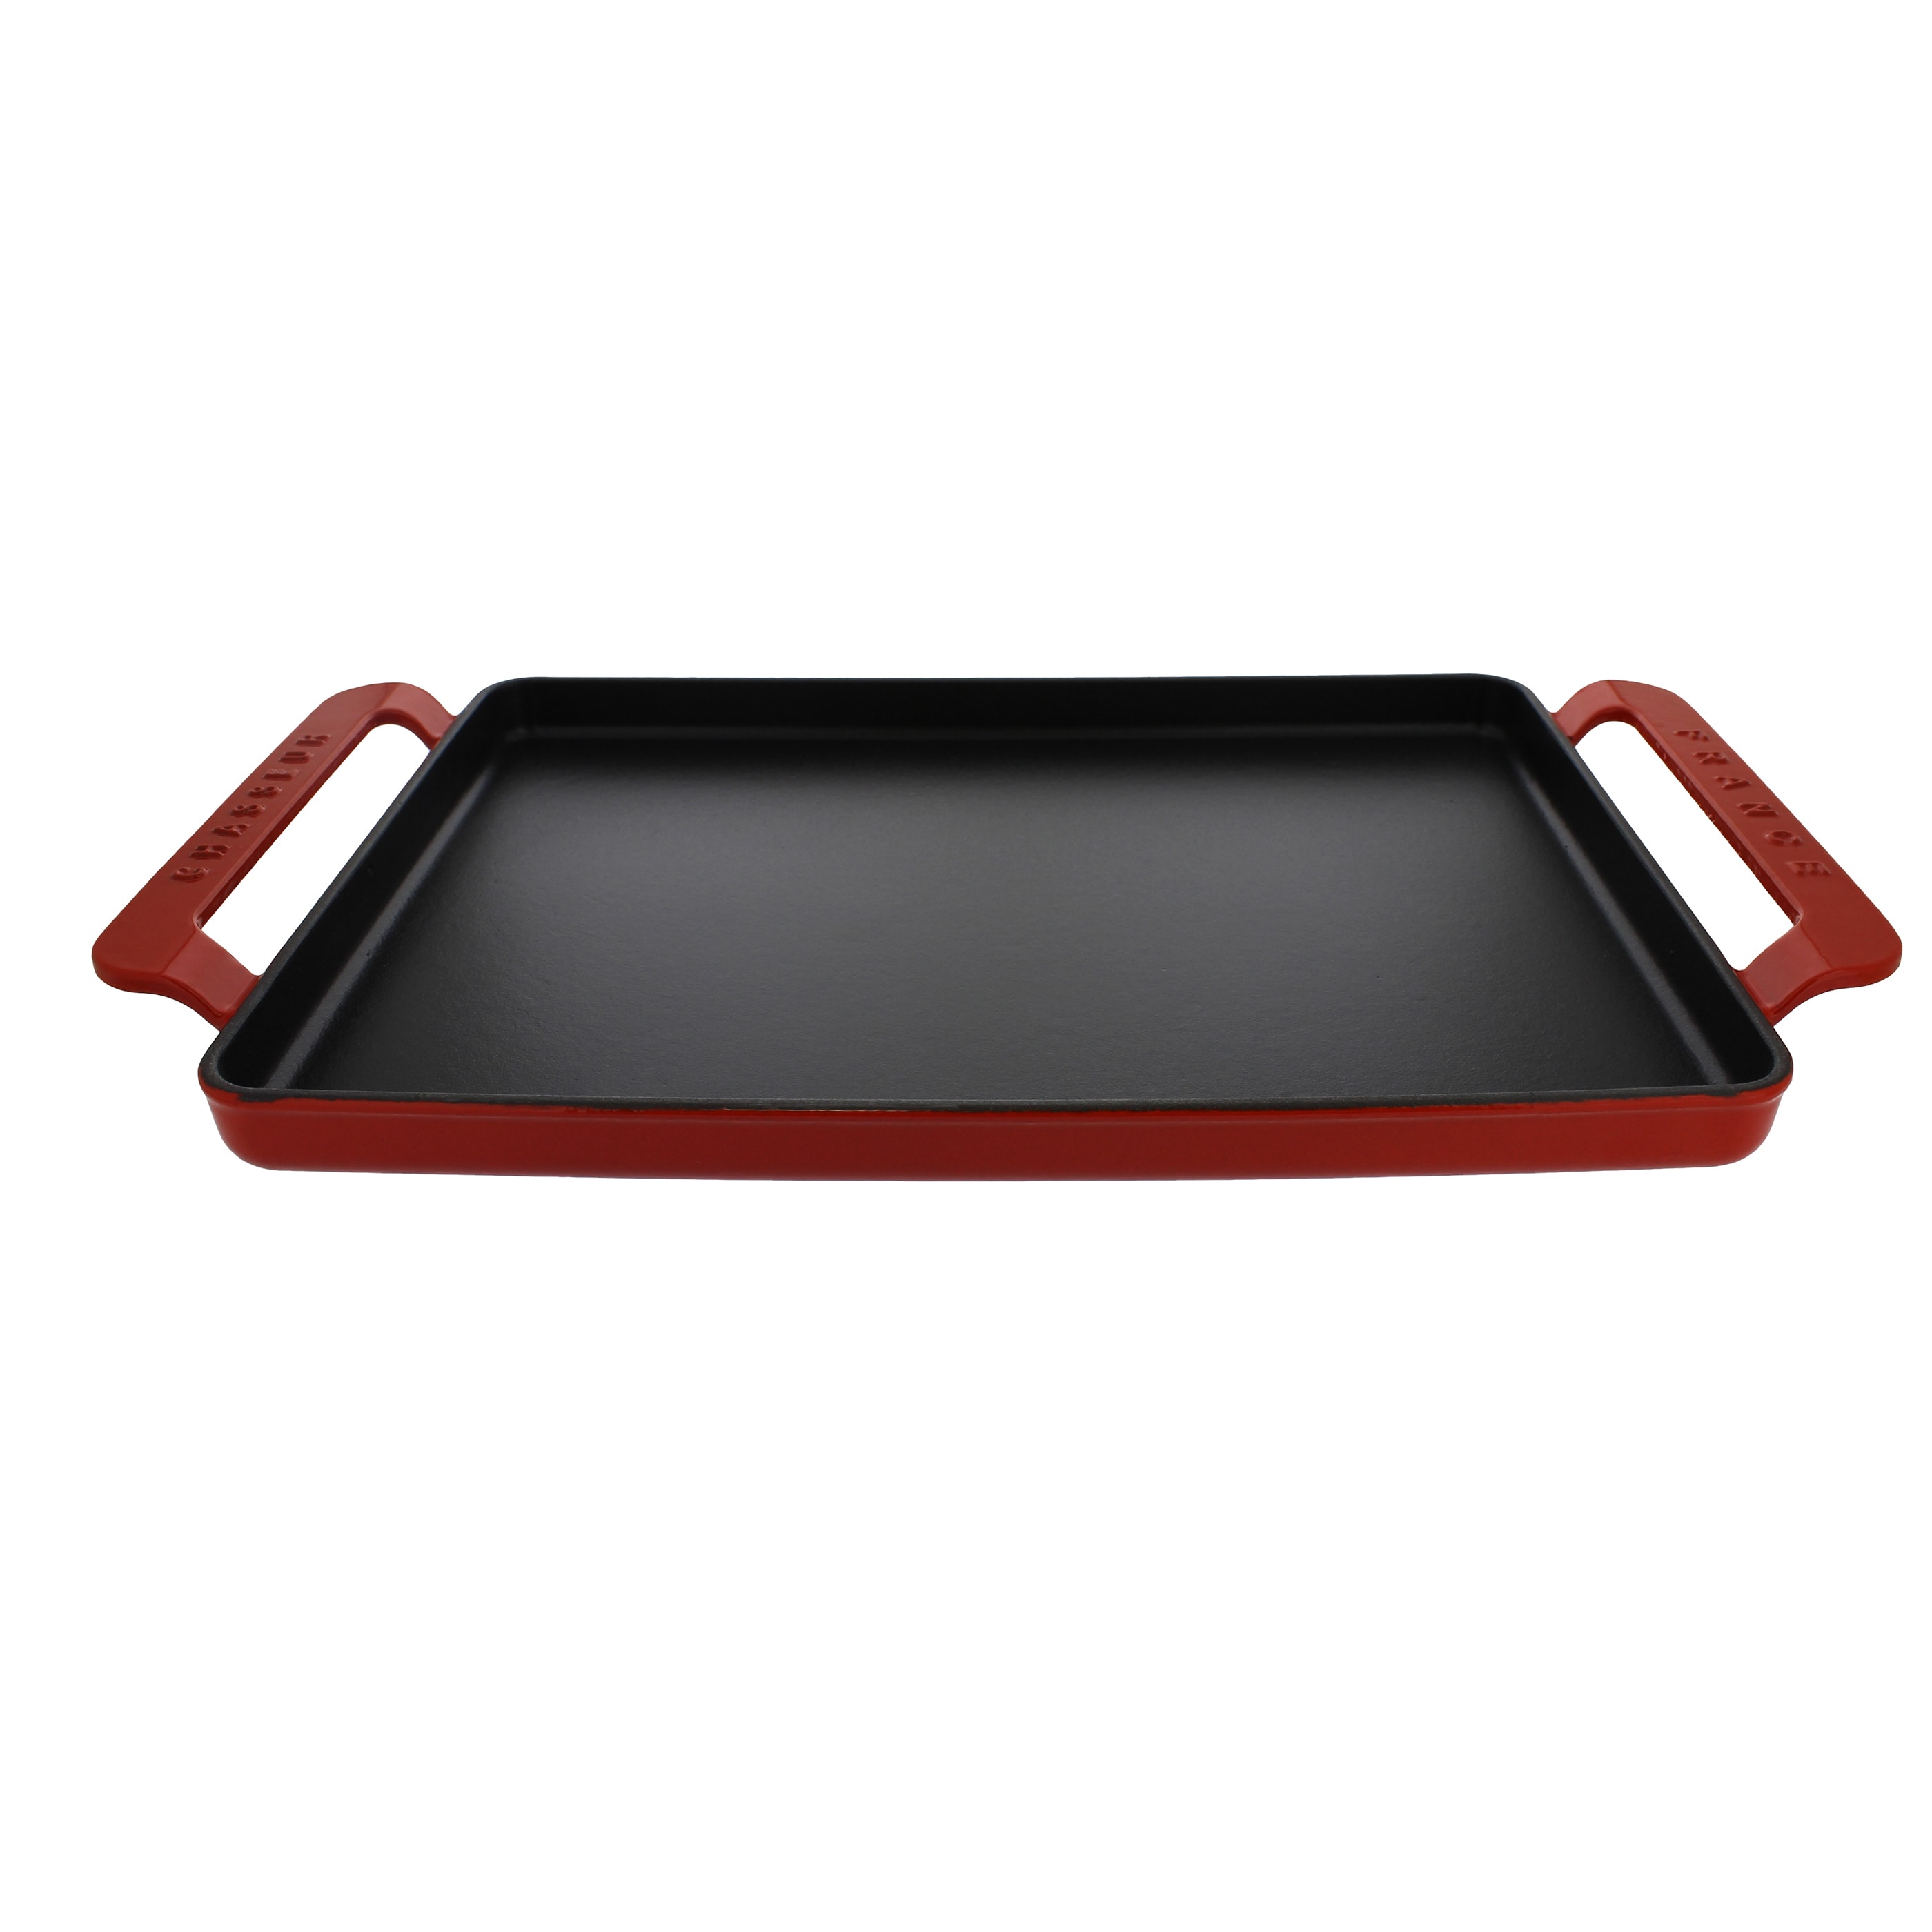 https://ak1.ostkcdn.com/images/products/15210055/Chasseur-14-inch-Red-Rectangular-French-Enameled-Cast-Iron-Griddle-686511bc-959f-4b5c-b166-c7b775e984e3.jpg